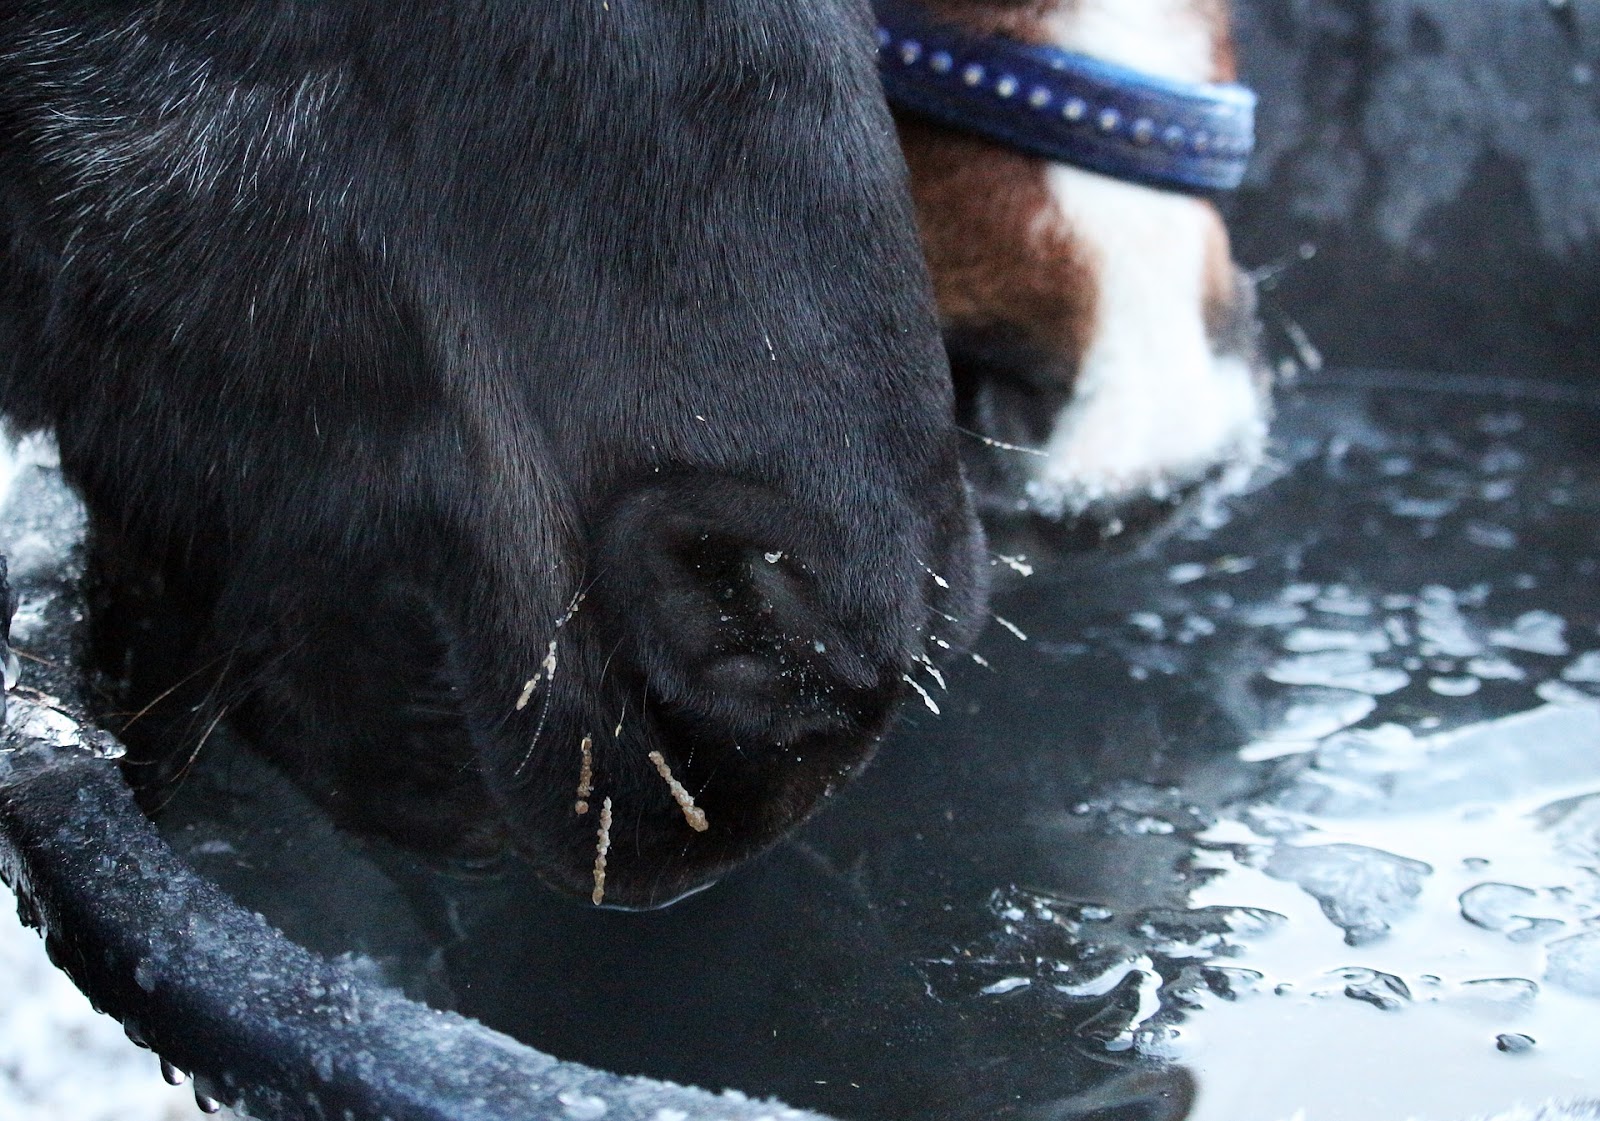 2 horses drink water from a heated trough in winter